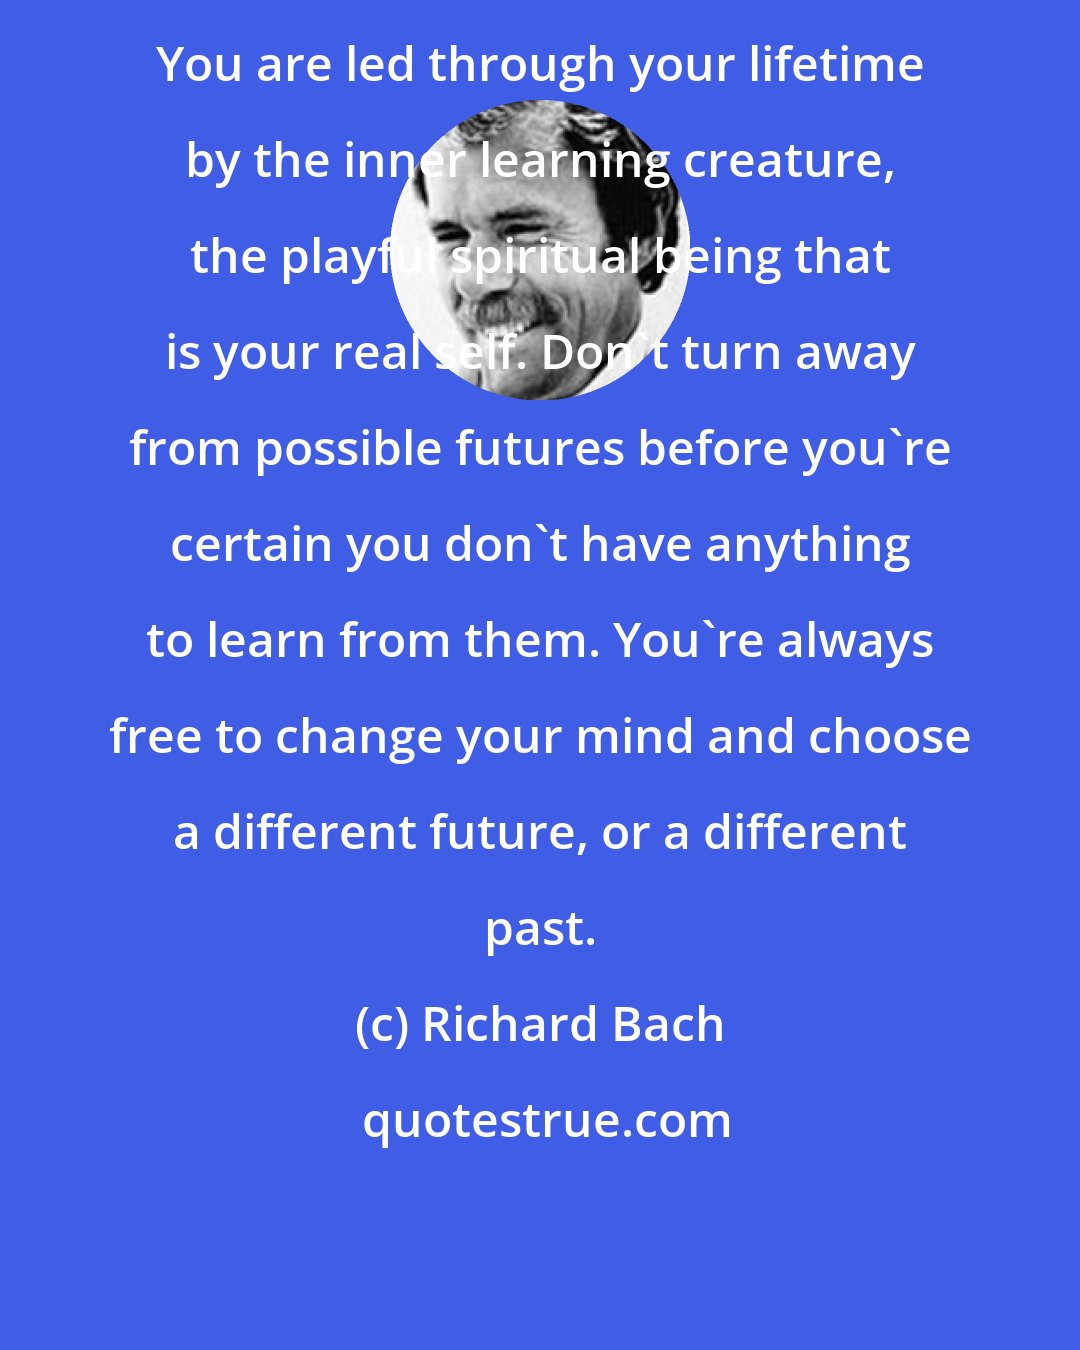 Richard Bach: You are led through your lifetime by the inner learning creature, the playful spiritual being that is your real self. Don't turn away from possible futures before you're certain you don't have anything to learn from them. You're always free to change your mind and choose a different future, or a different past.